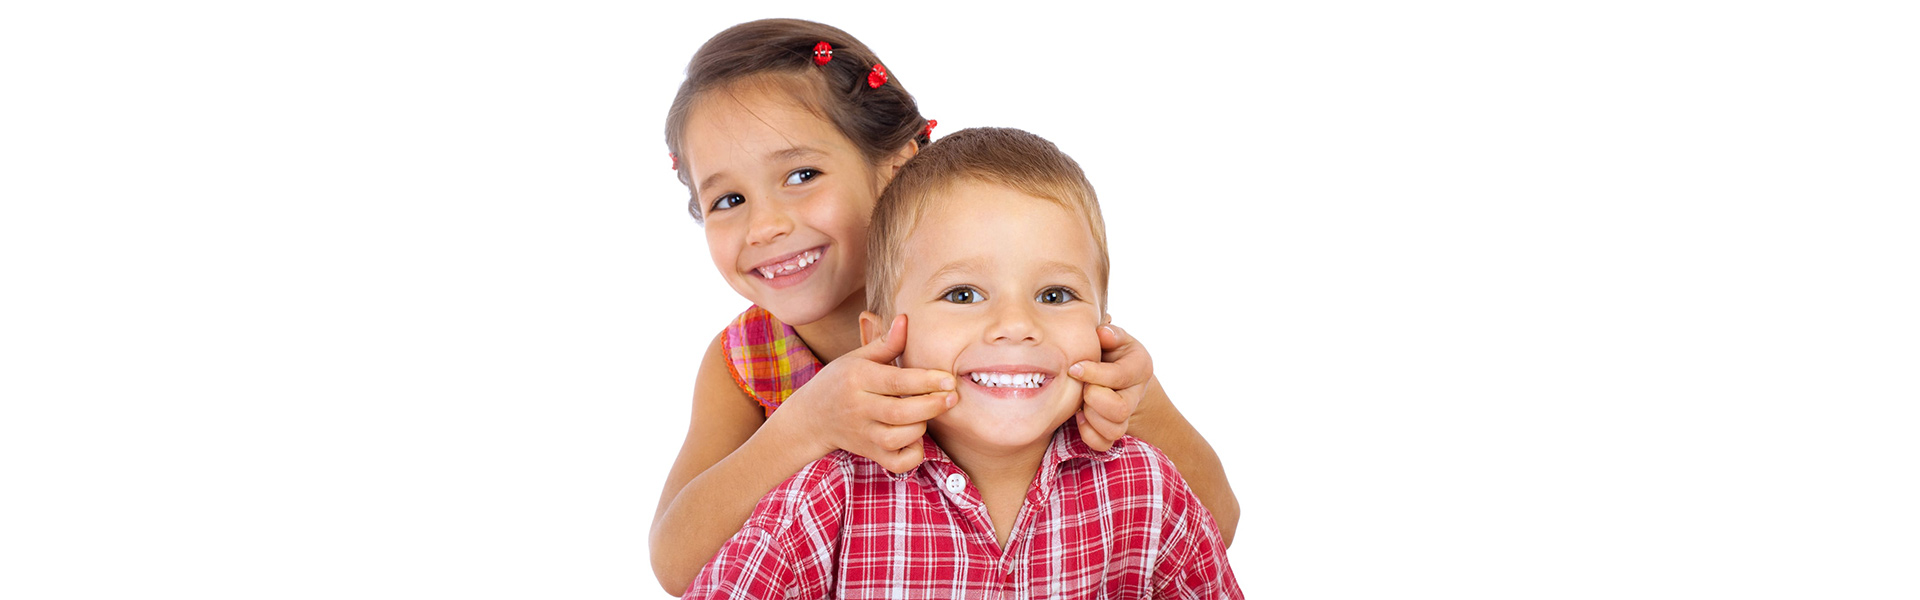 Top 10 Reasons Why Your Child Needs a Pediatric Dentist